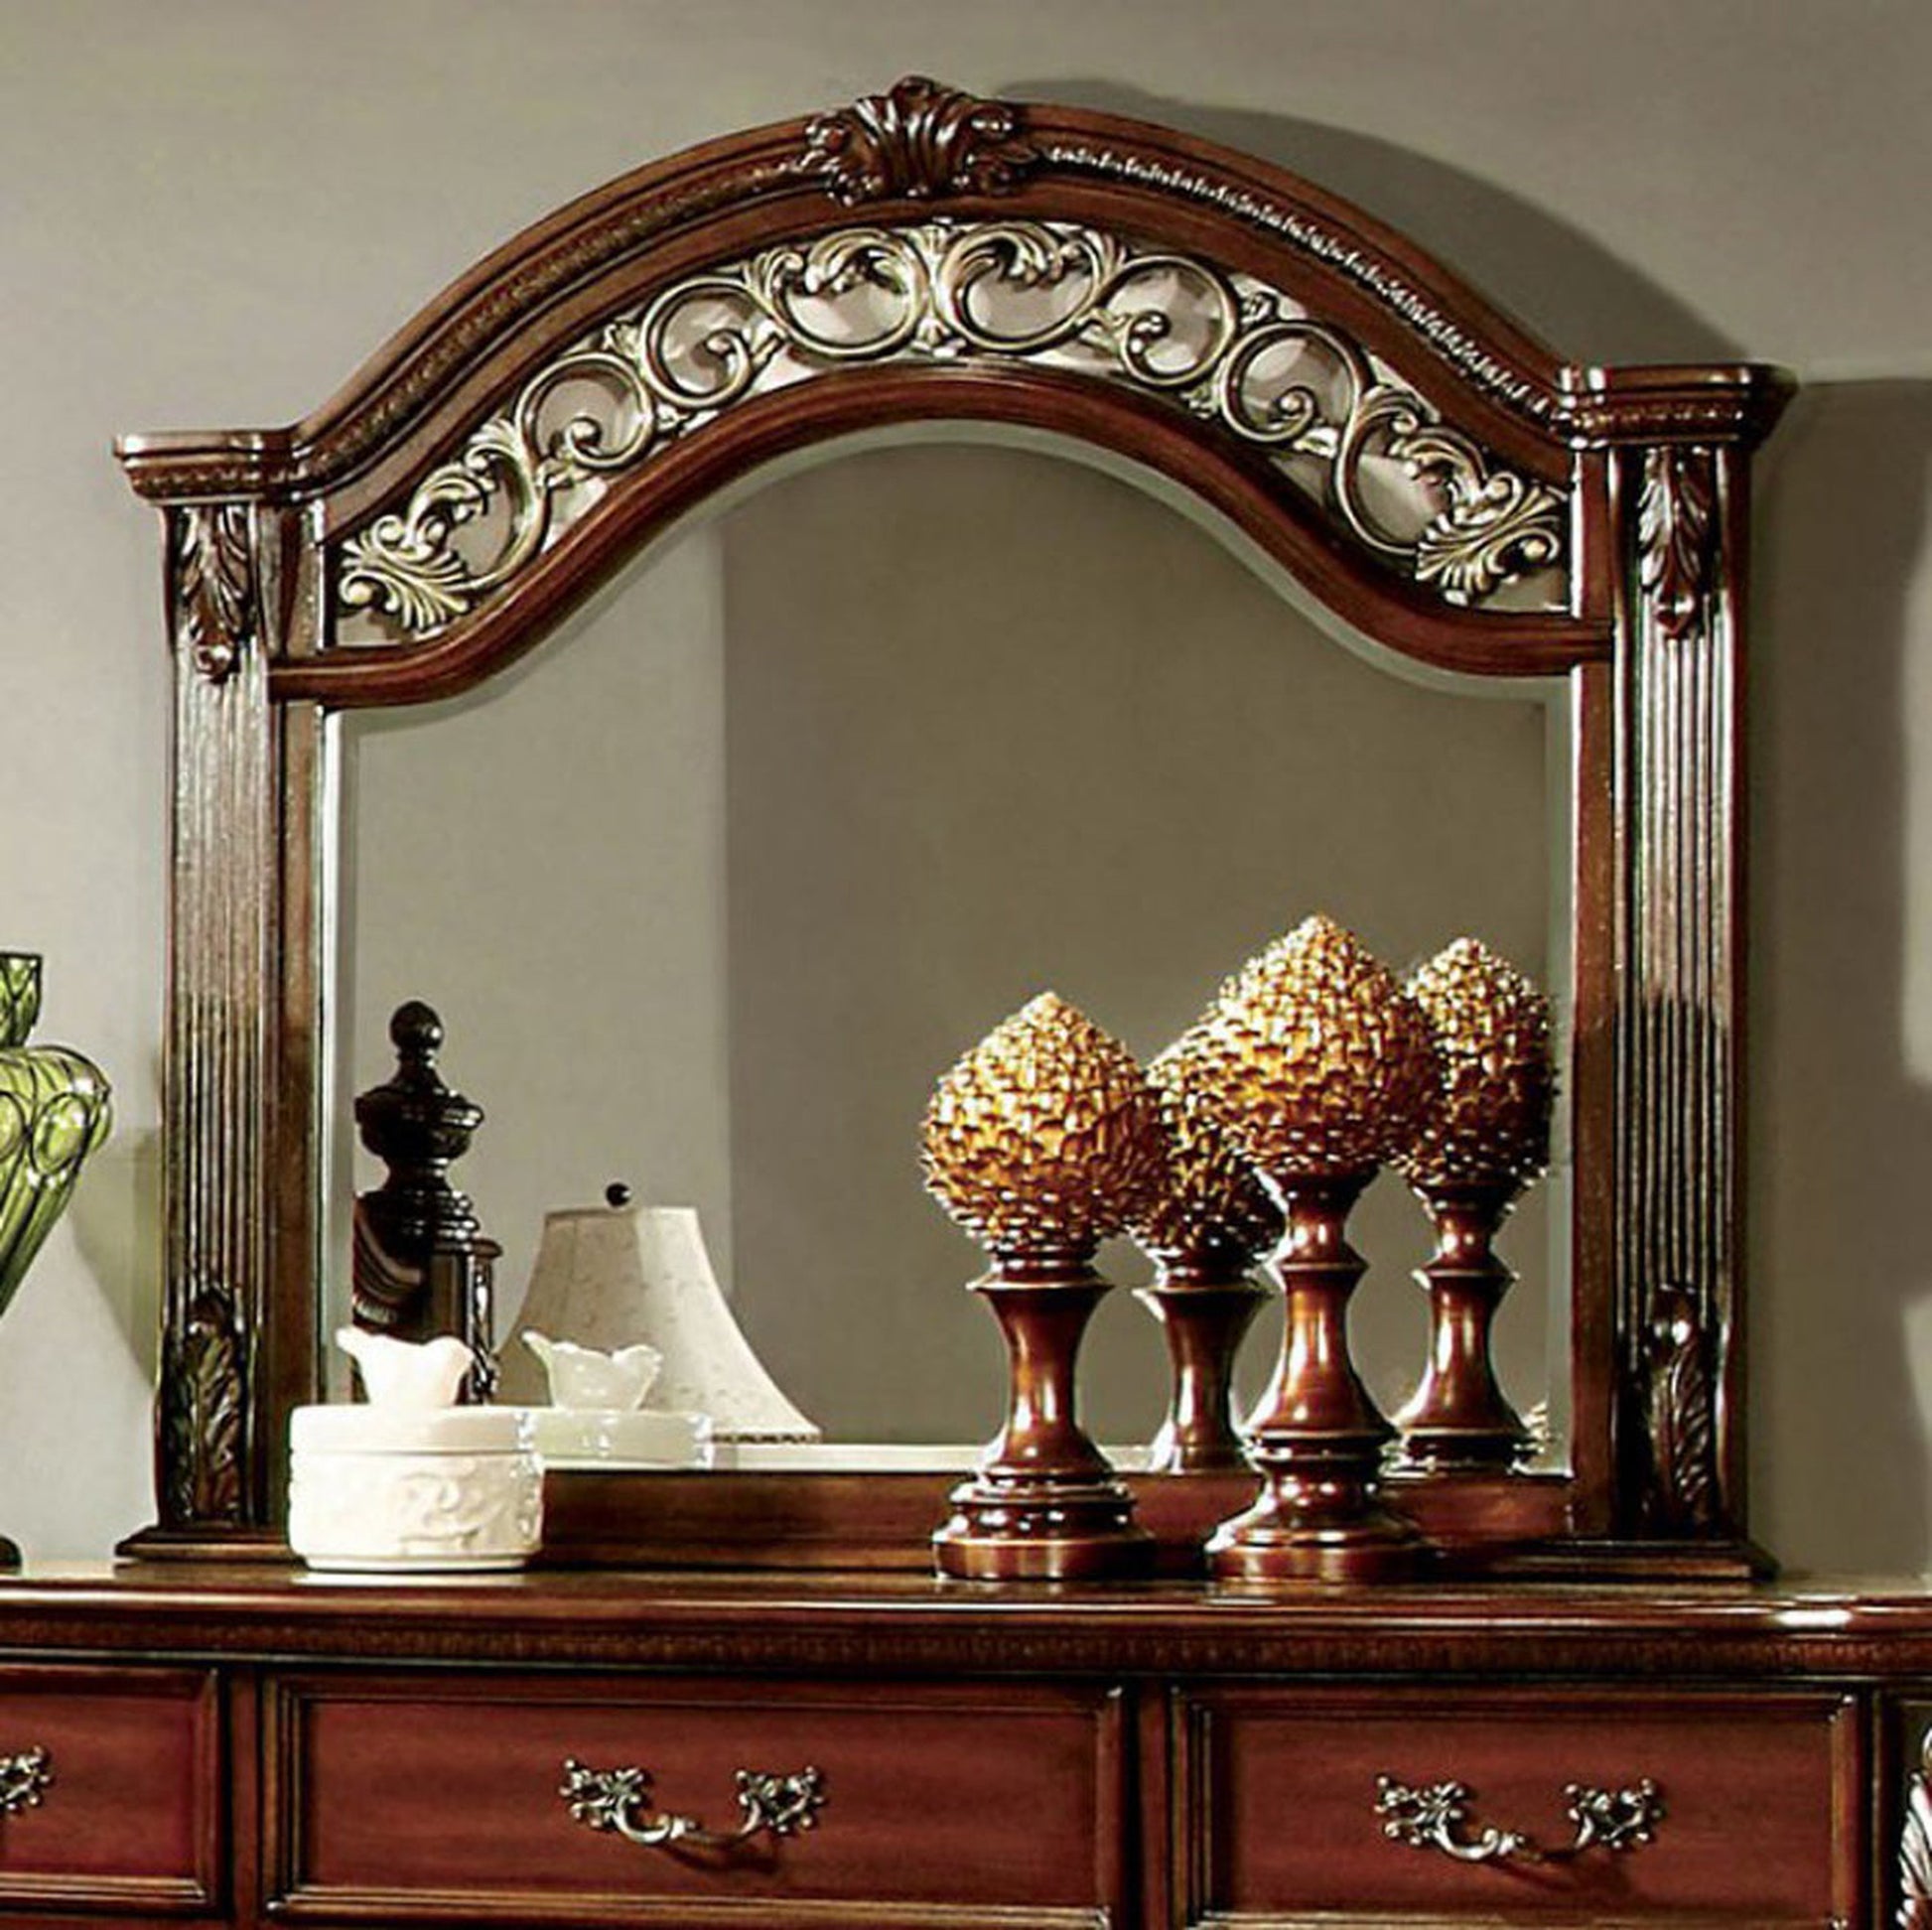 Benzara 42" x 45" Cherry Traditional Arched Ornate Engraved Wooden Framed Dresser Mirror